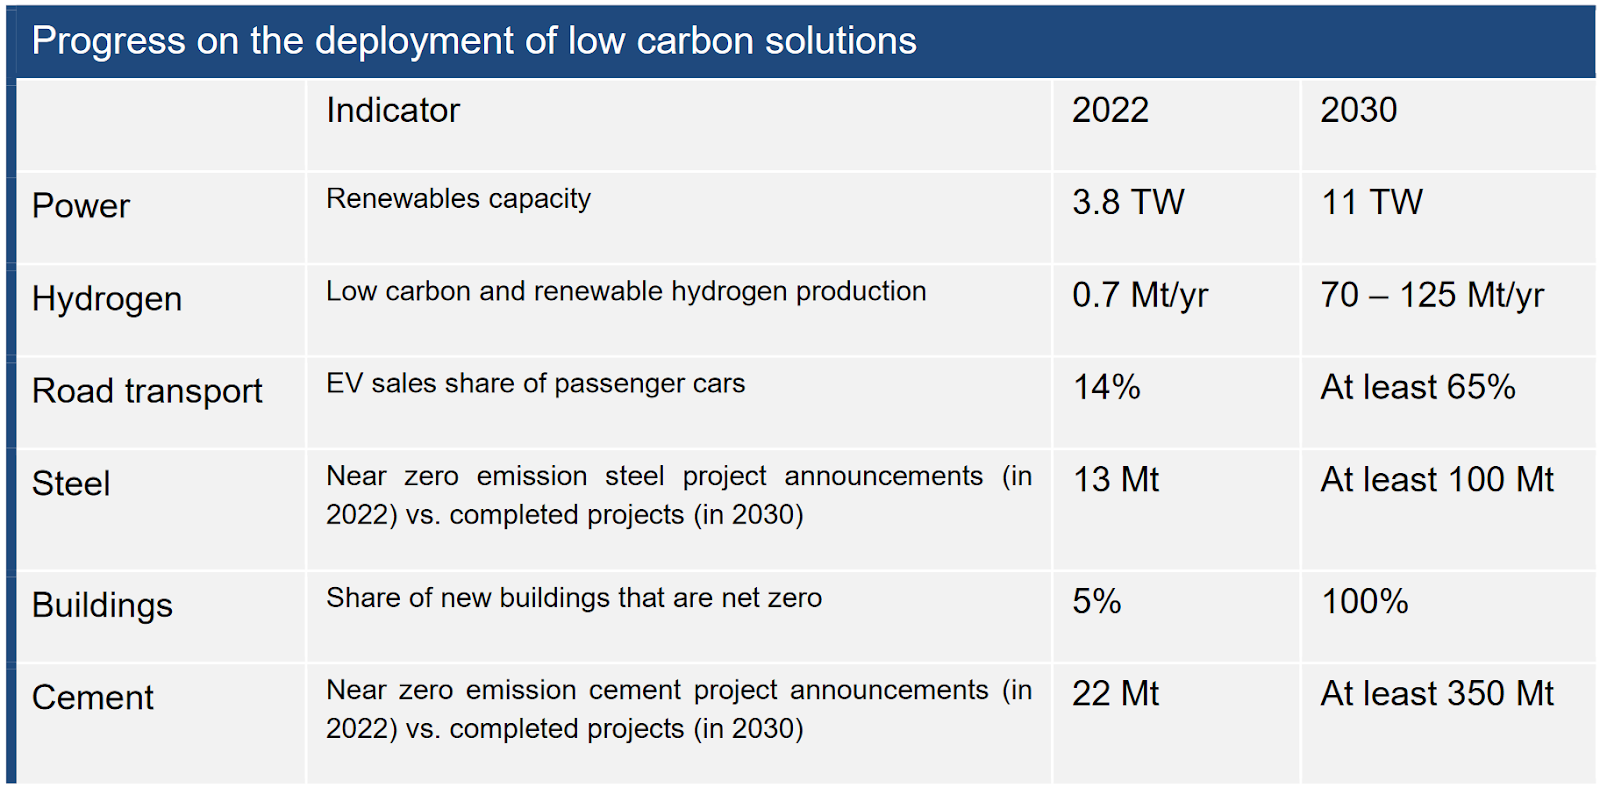 Progress on the development of low carbon solutions
Source: IEA